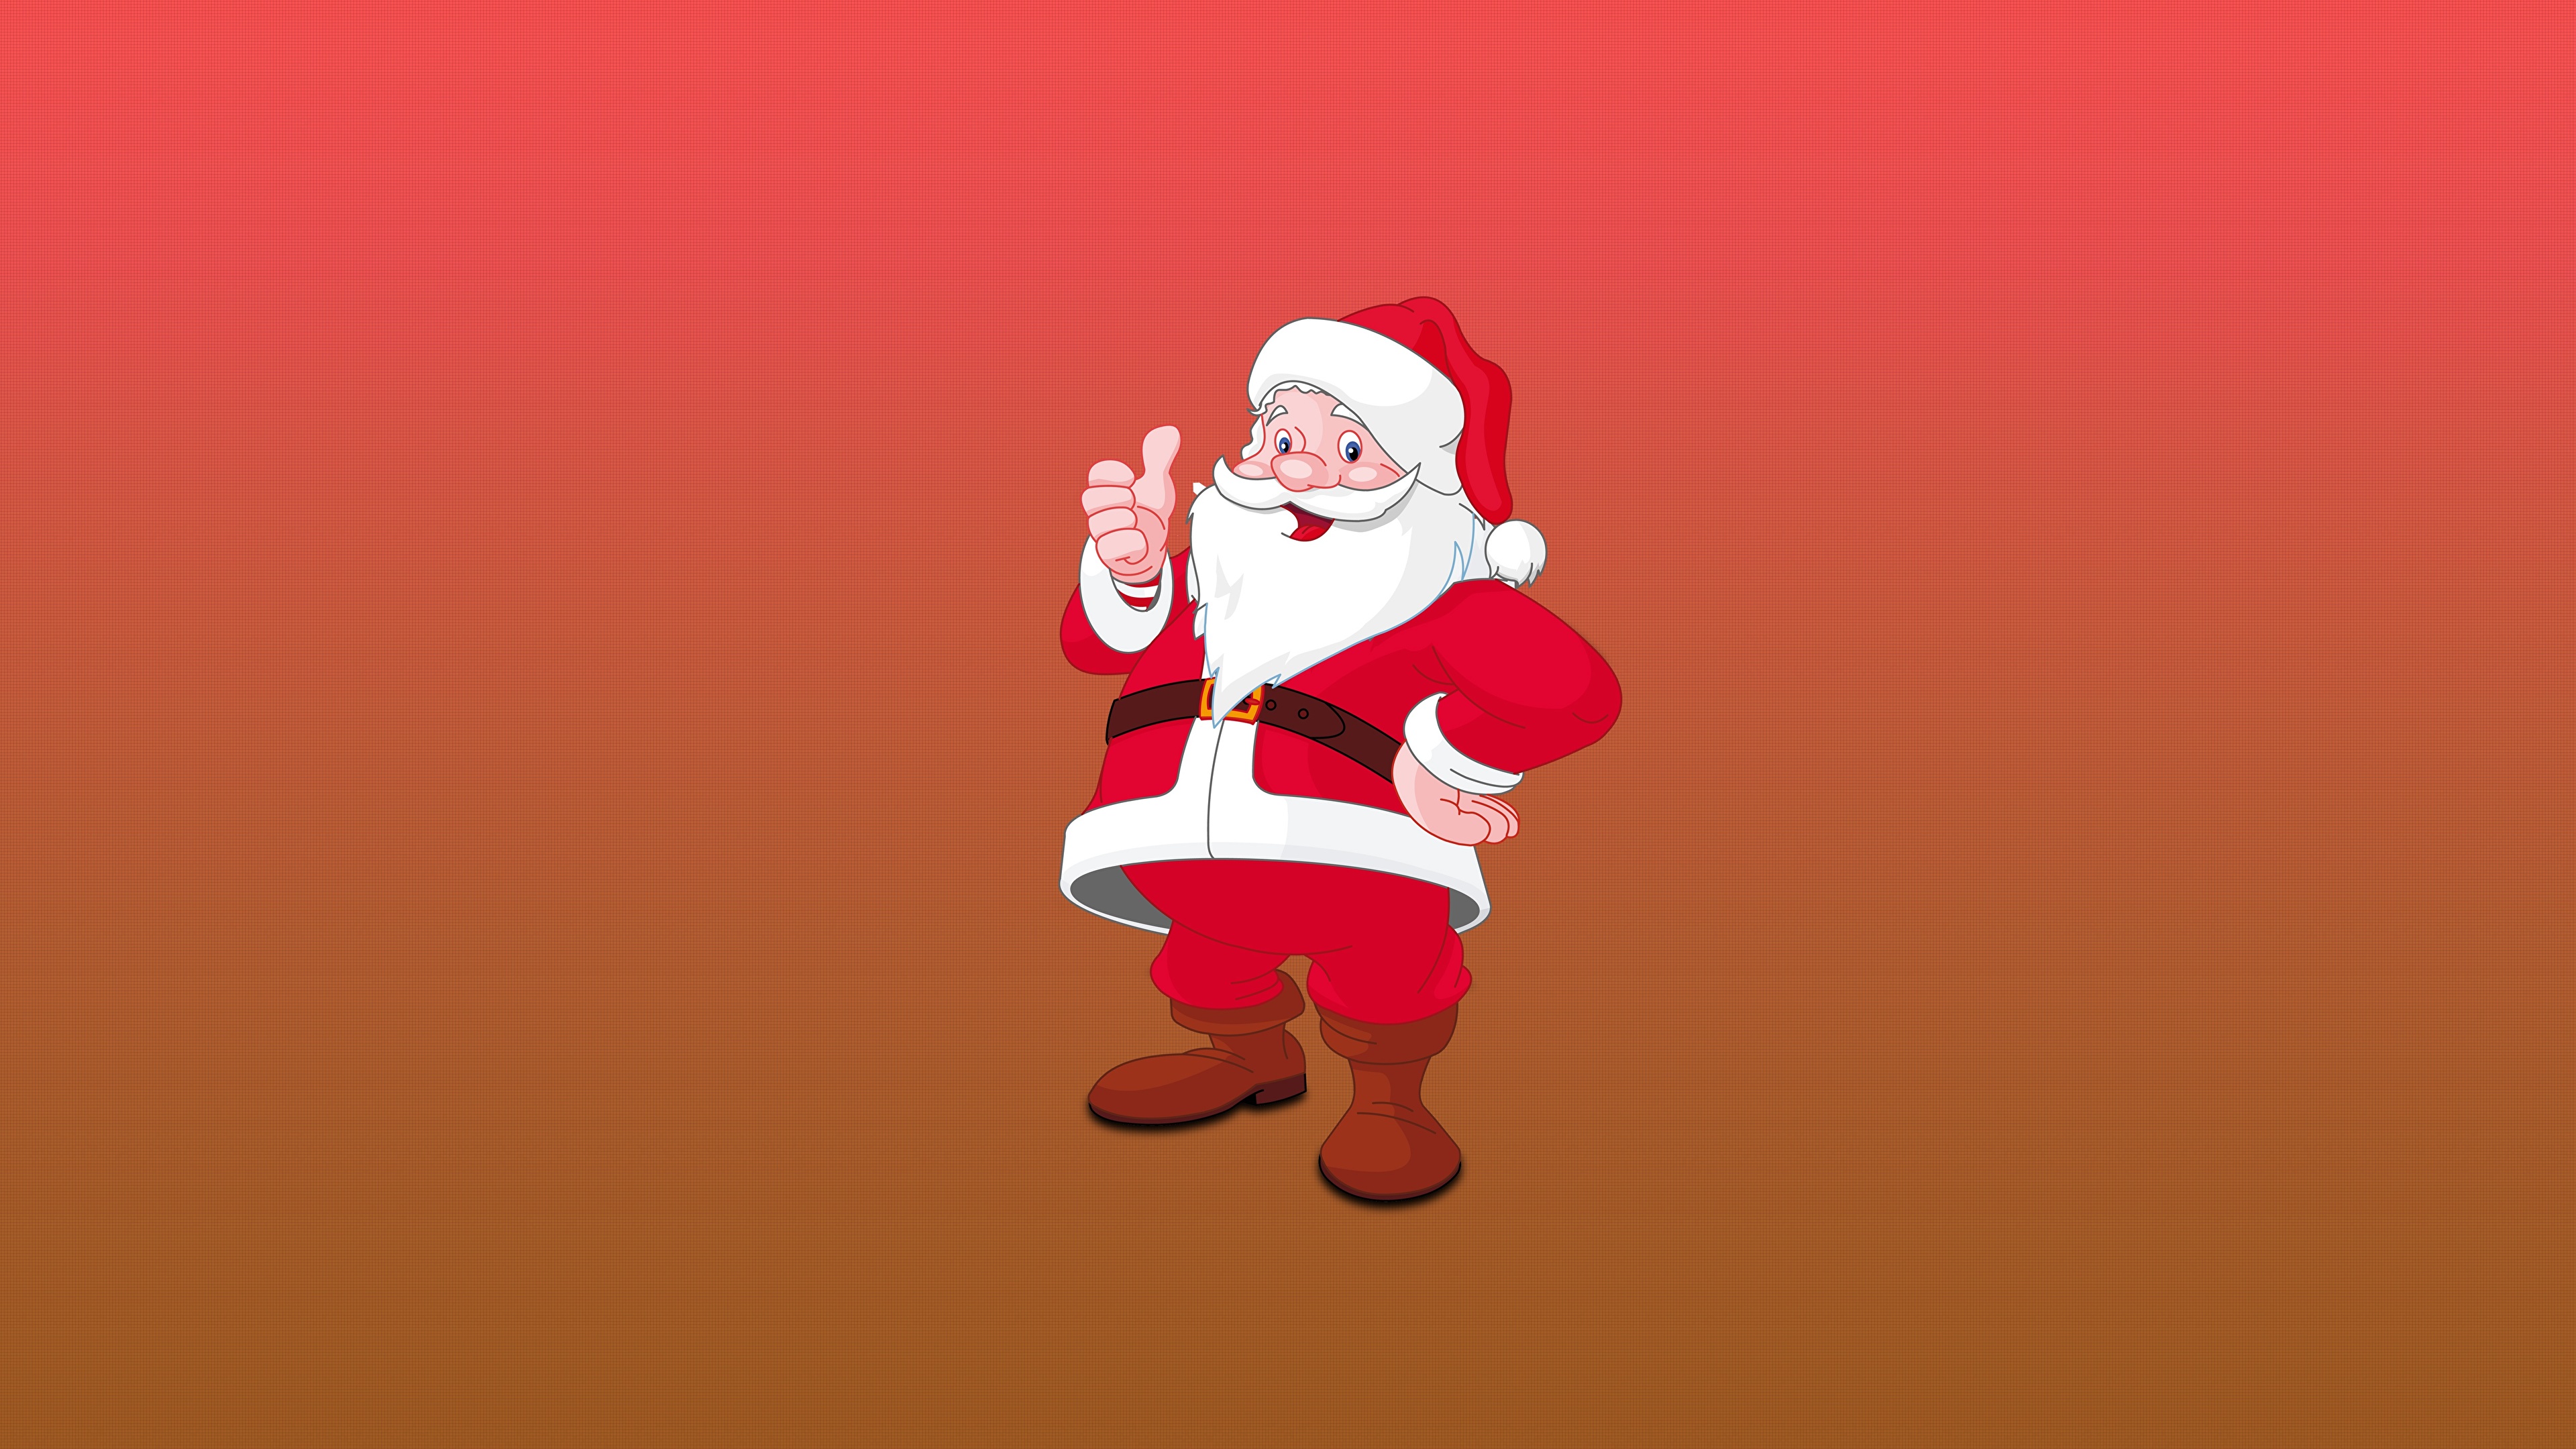 Santa Claus, Illustration, Ded Moroz, Christmas Day, Red. Wallpaper in 3840x2160 Resolution